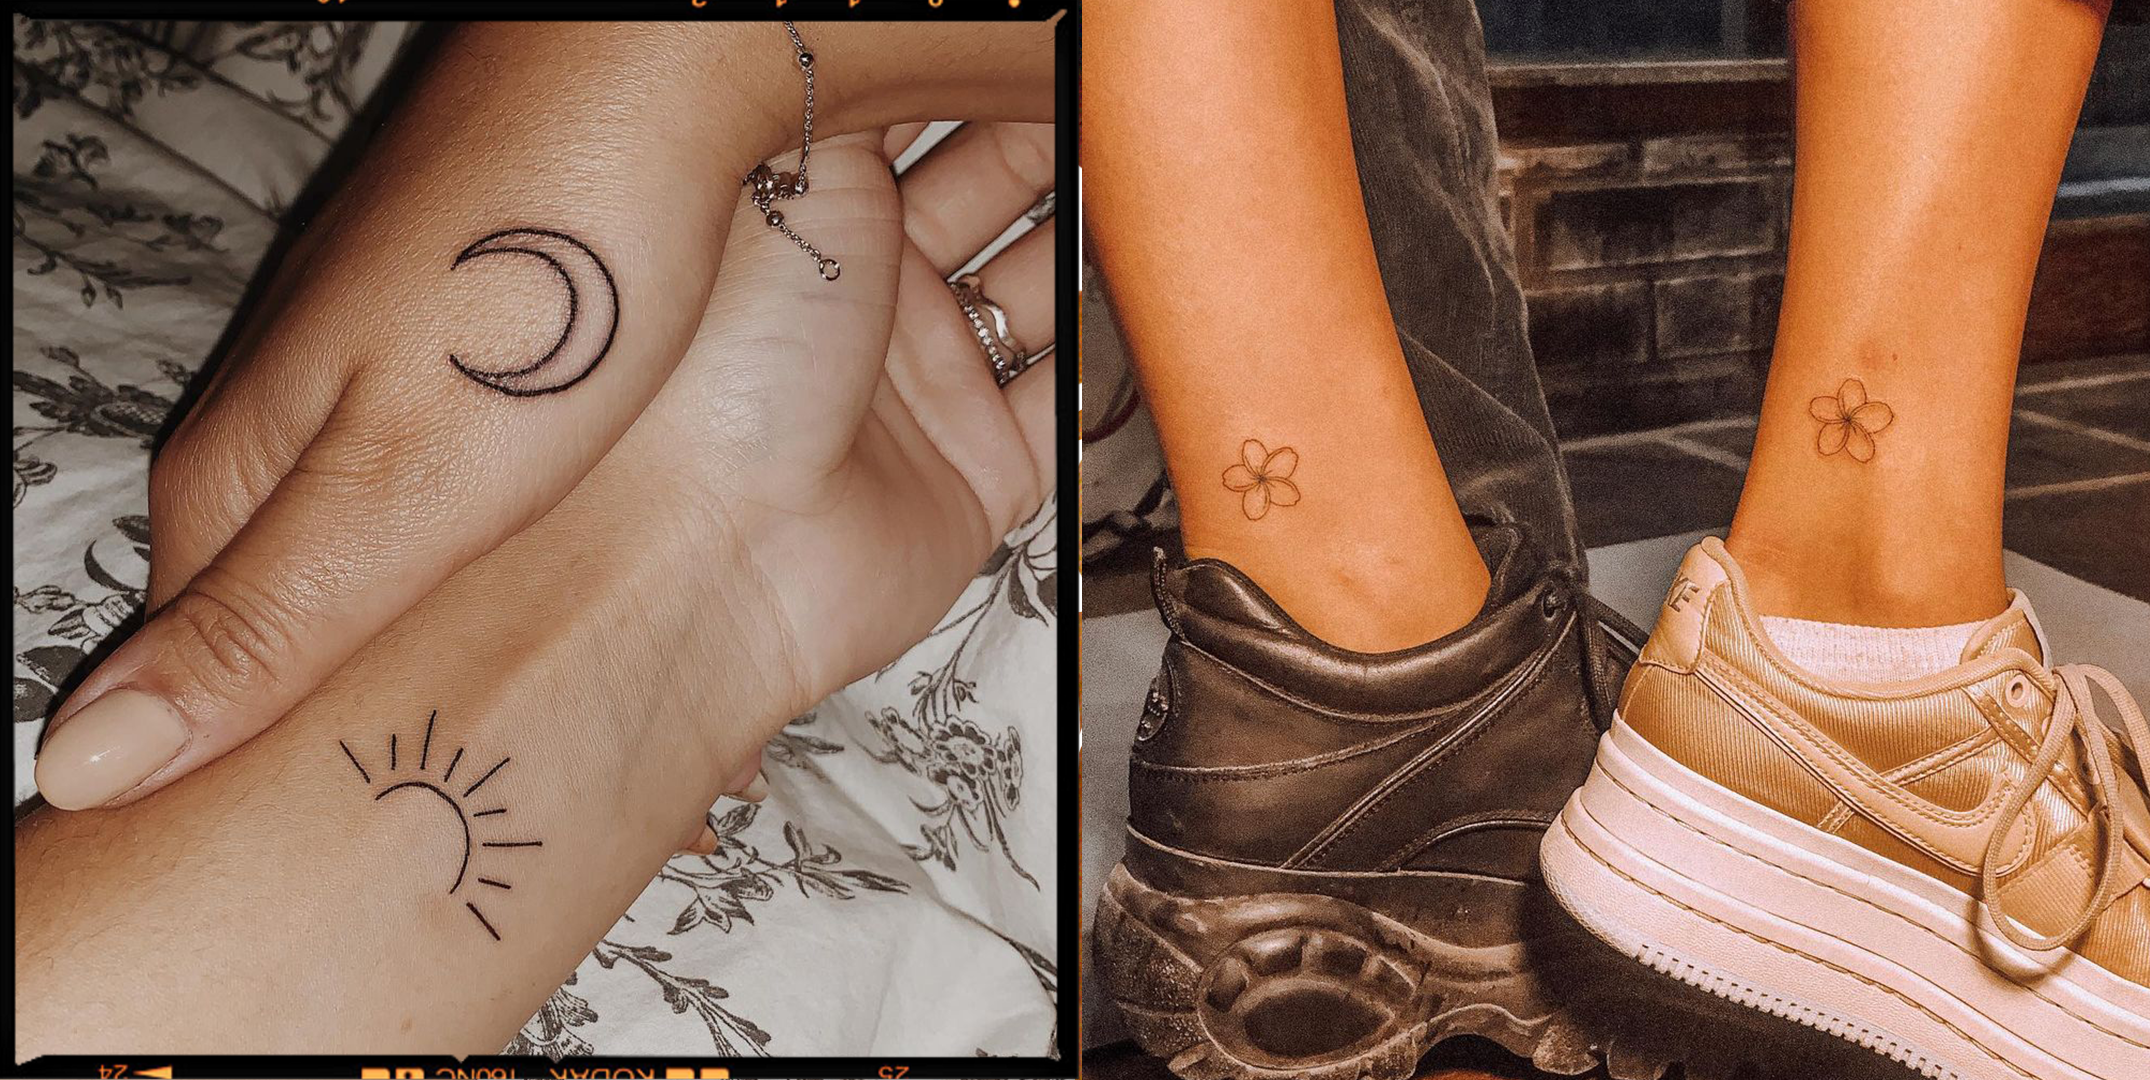 Show Us Your Celebrity Tattoos And Tell Us The Stories Behind Them